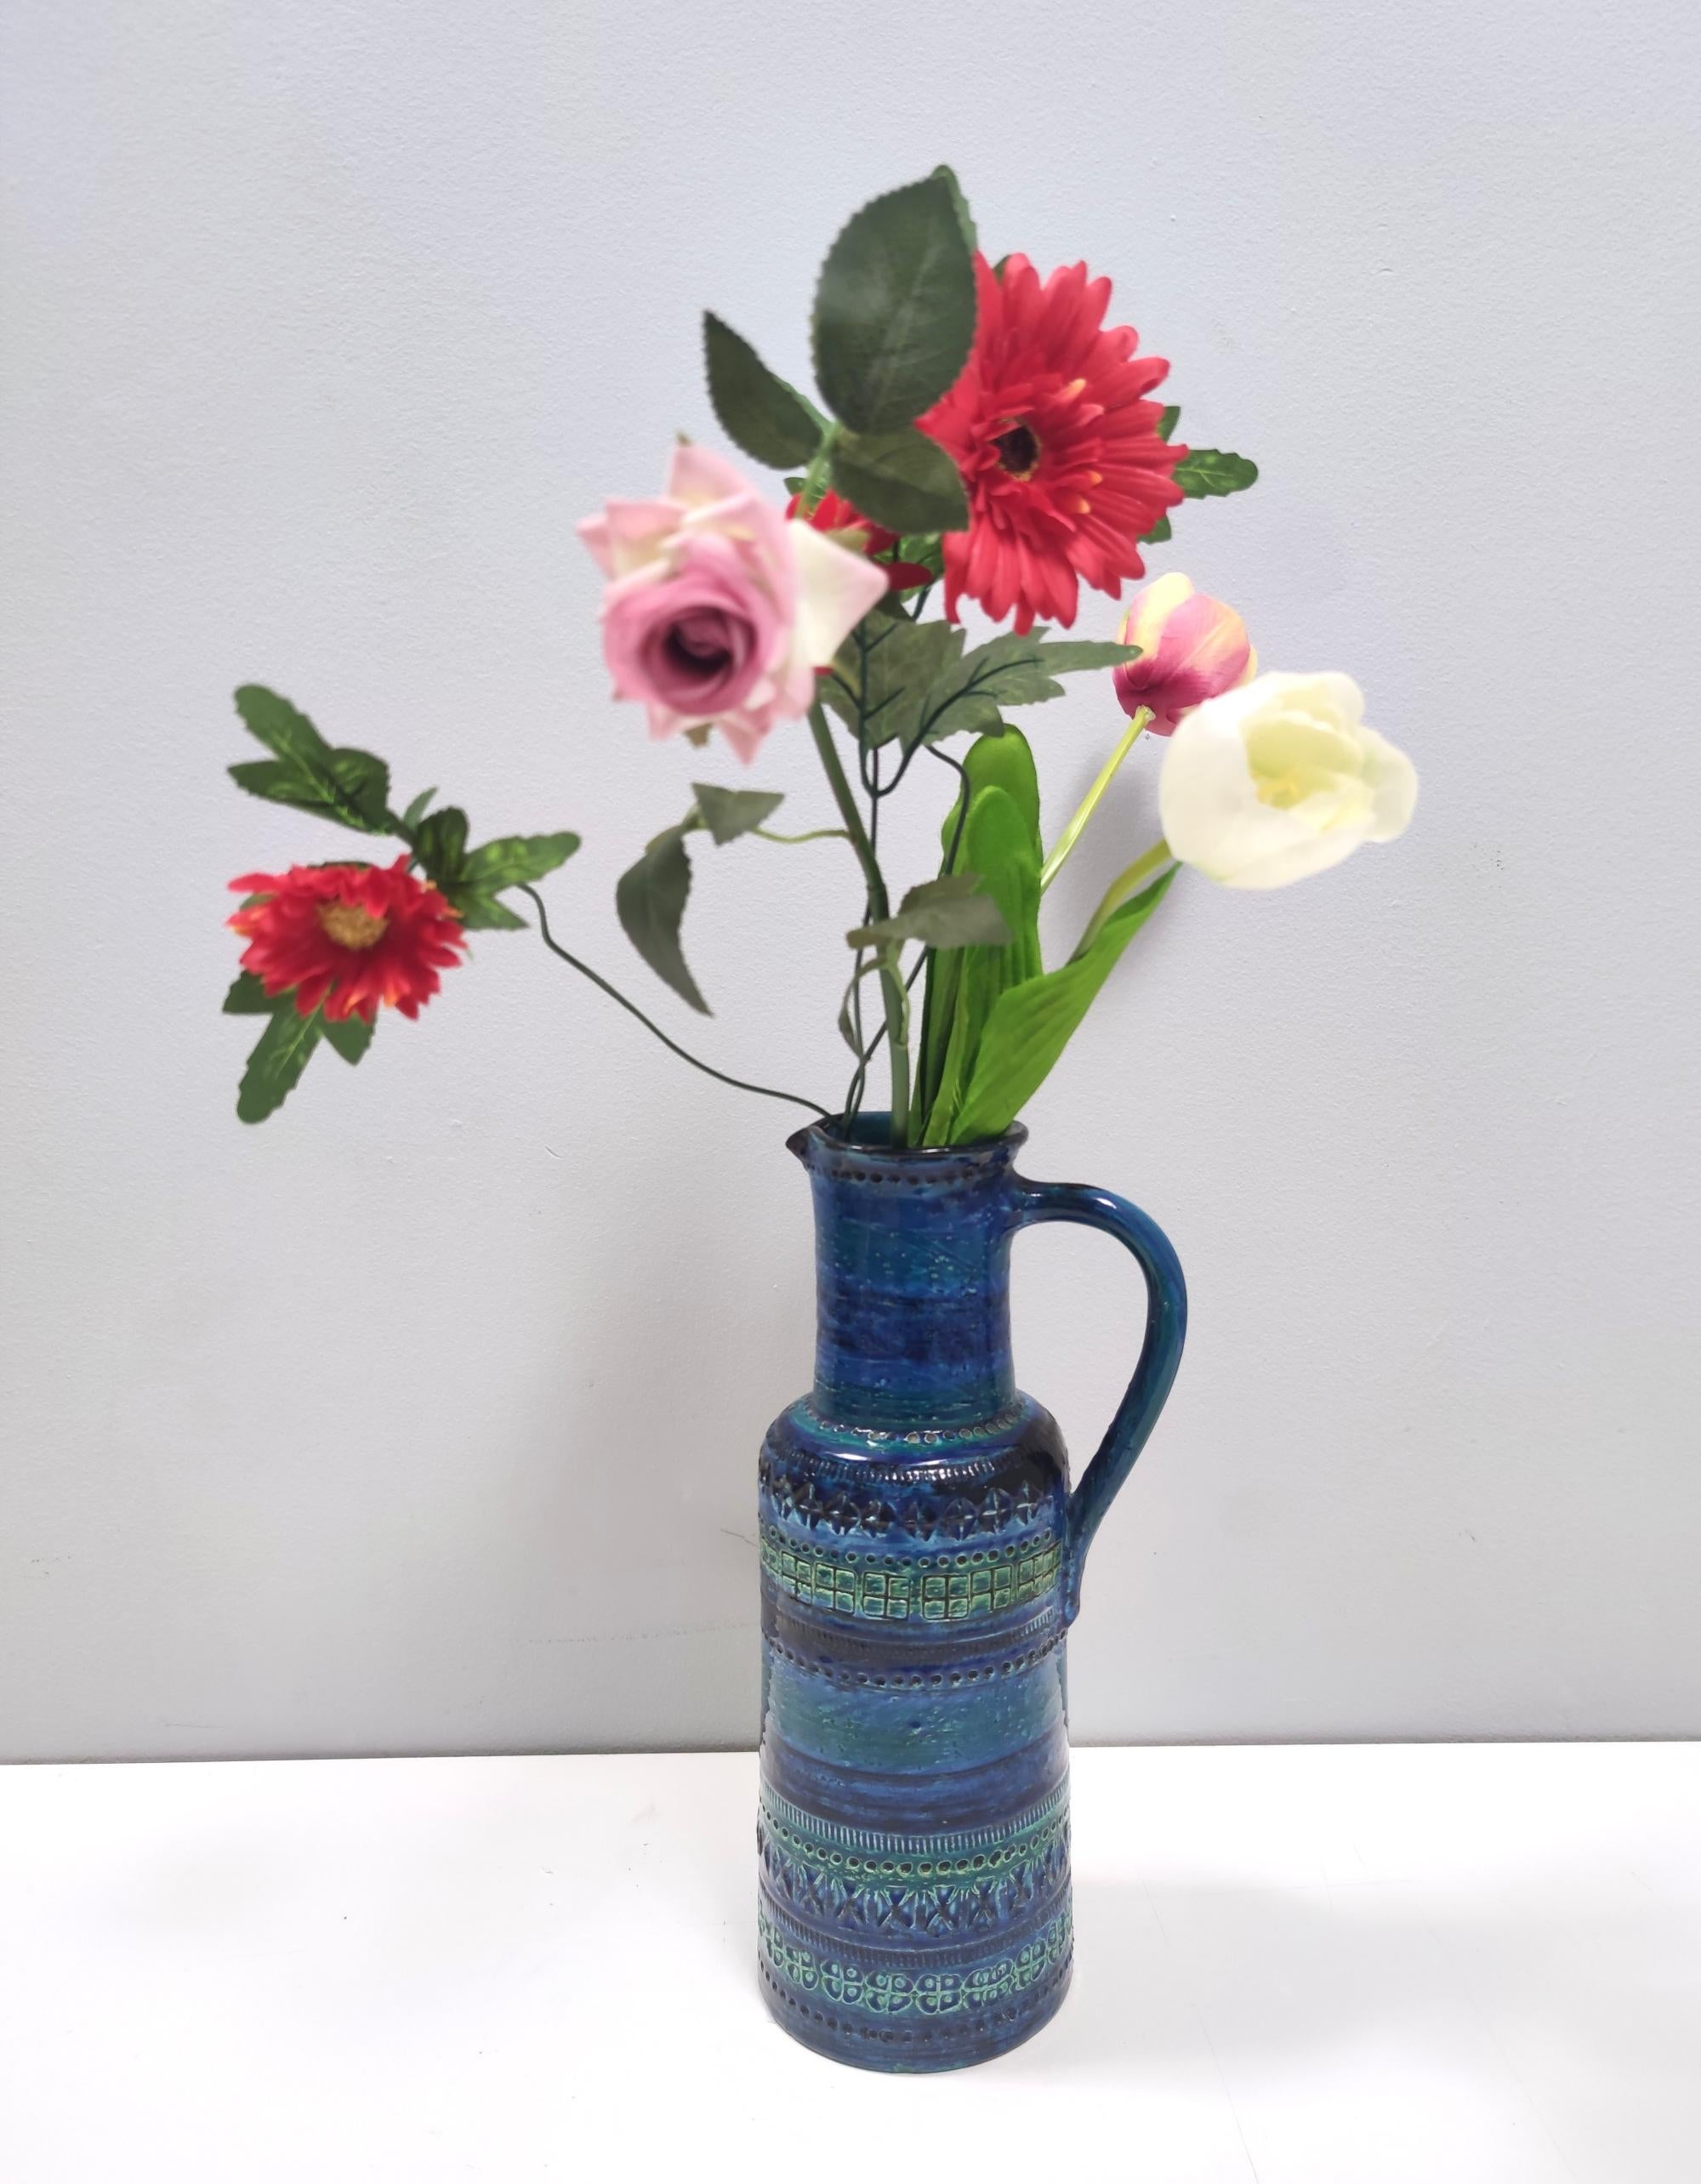 This is a Rimini blue vase from the 1970s. Made in Italy.
It was designed by Aldo Londi and produced by Flavia Montelupo, also known as Bitossi.
Bitossi was founded in 1921 in Montelupo, a city near Florence, and it is one of the most known Italian